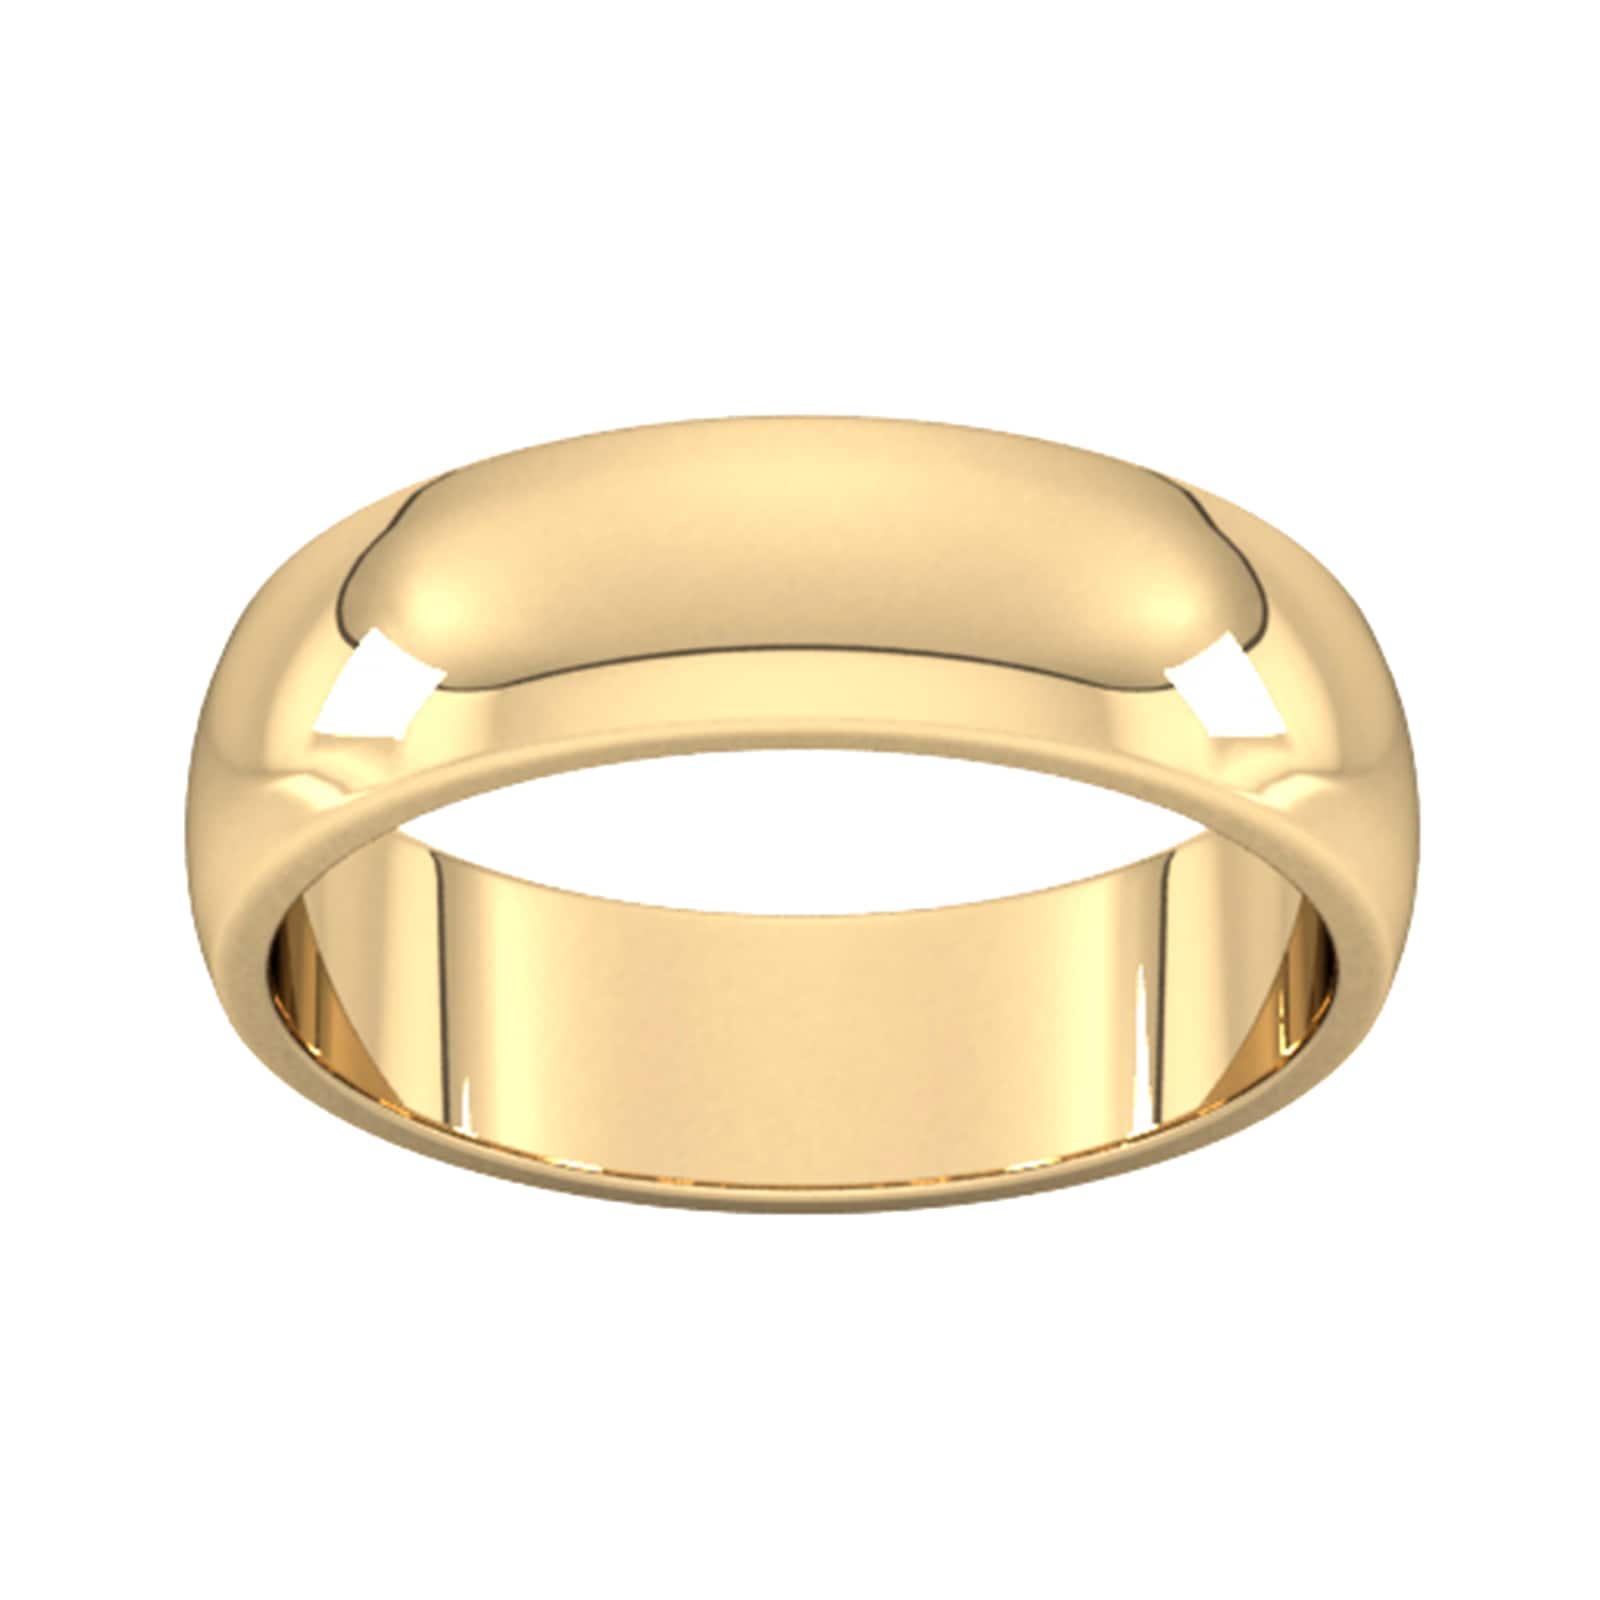 6mm D Shape Heavy Wedding Ring In 18 Carat Yellow Gold - Ring Size W